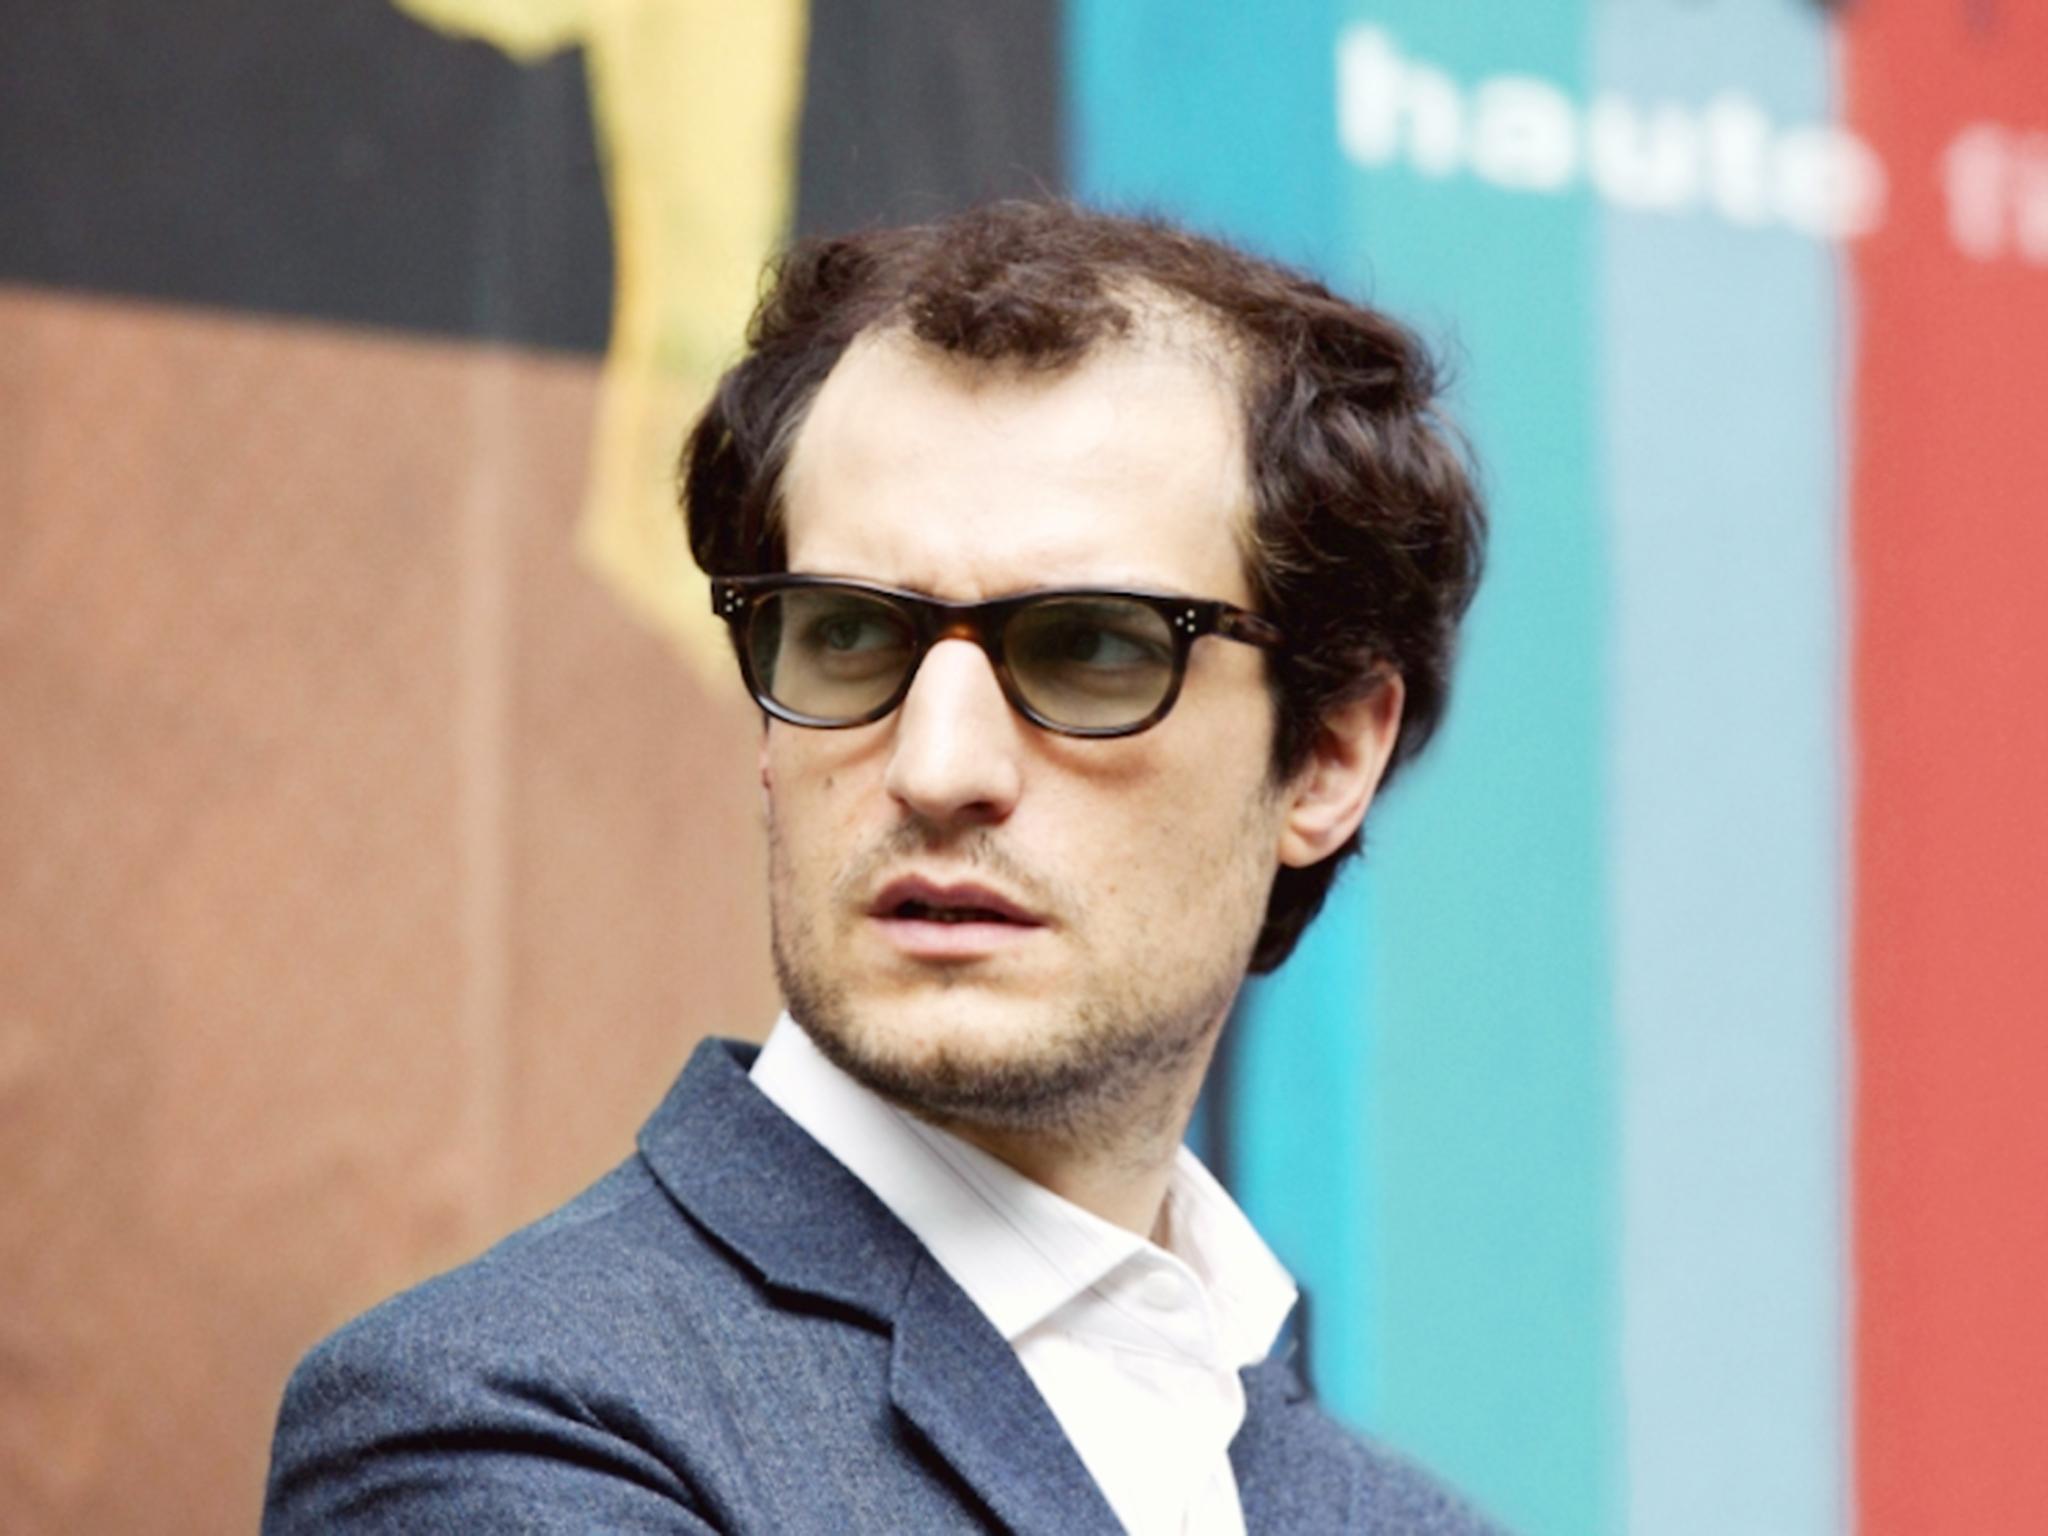 Redoubtable's Louis Garrel: 'I changed everything: my hair, I put